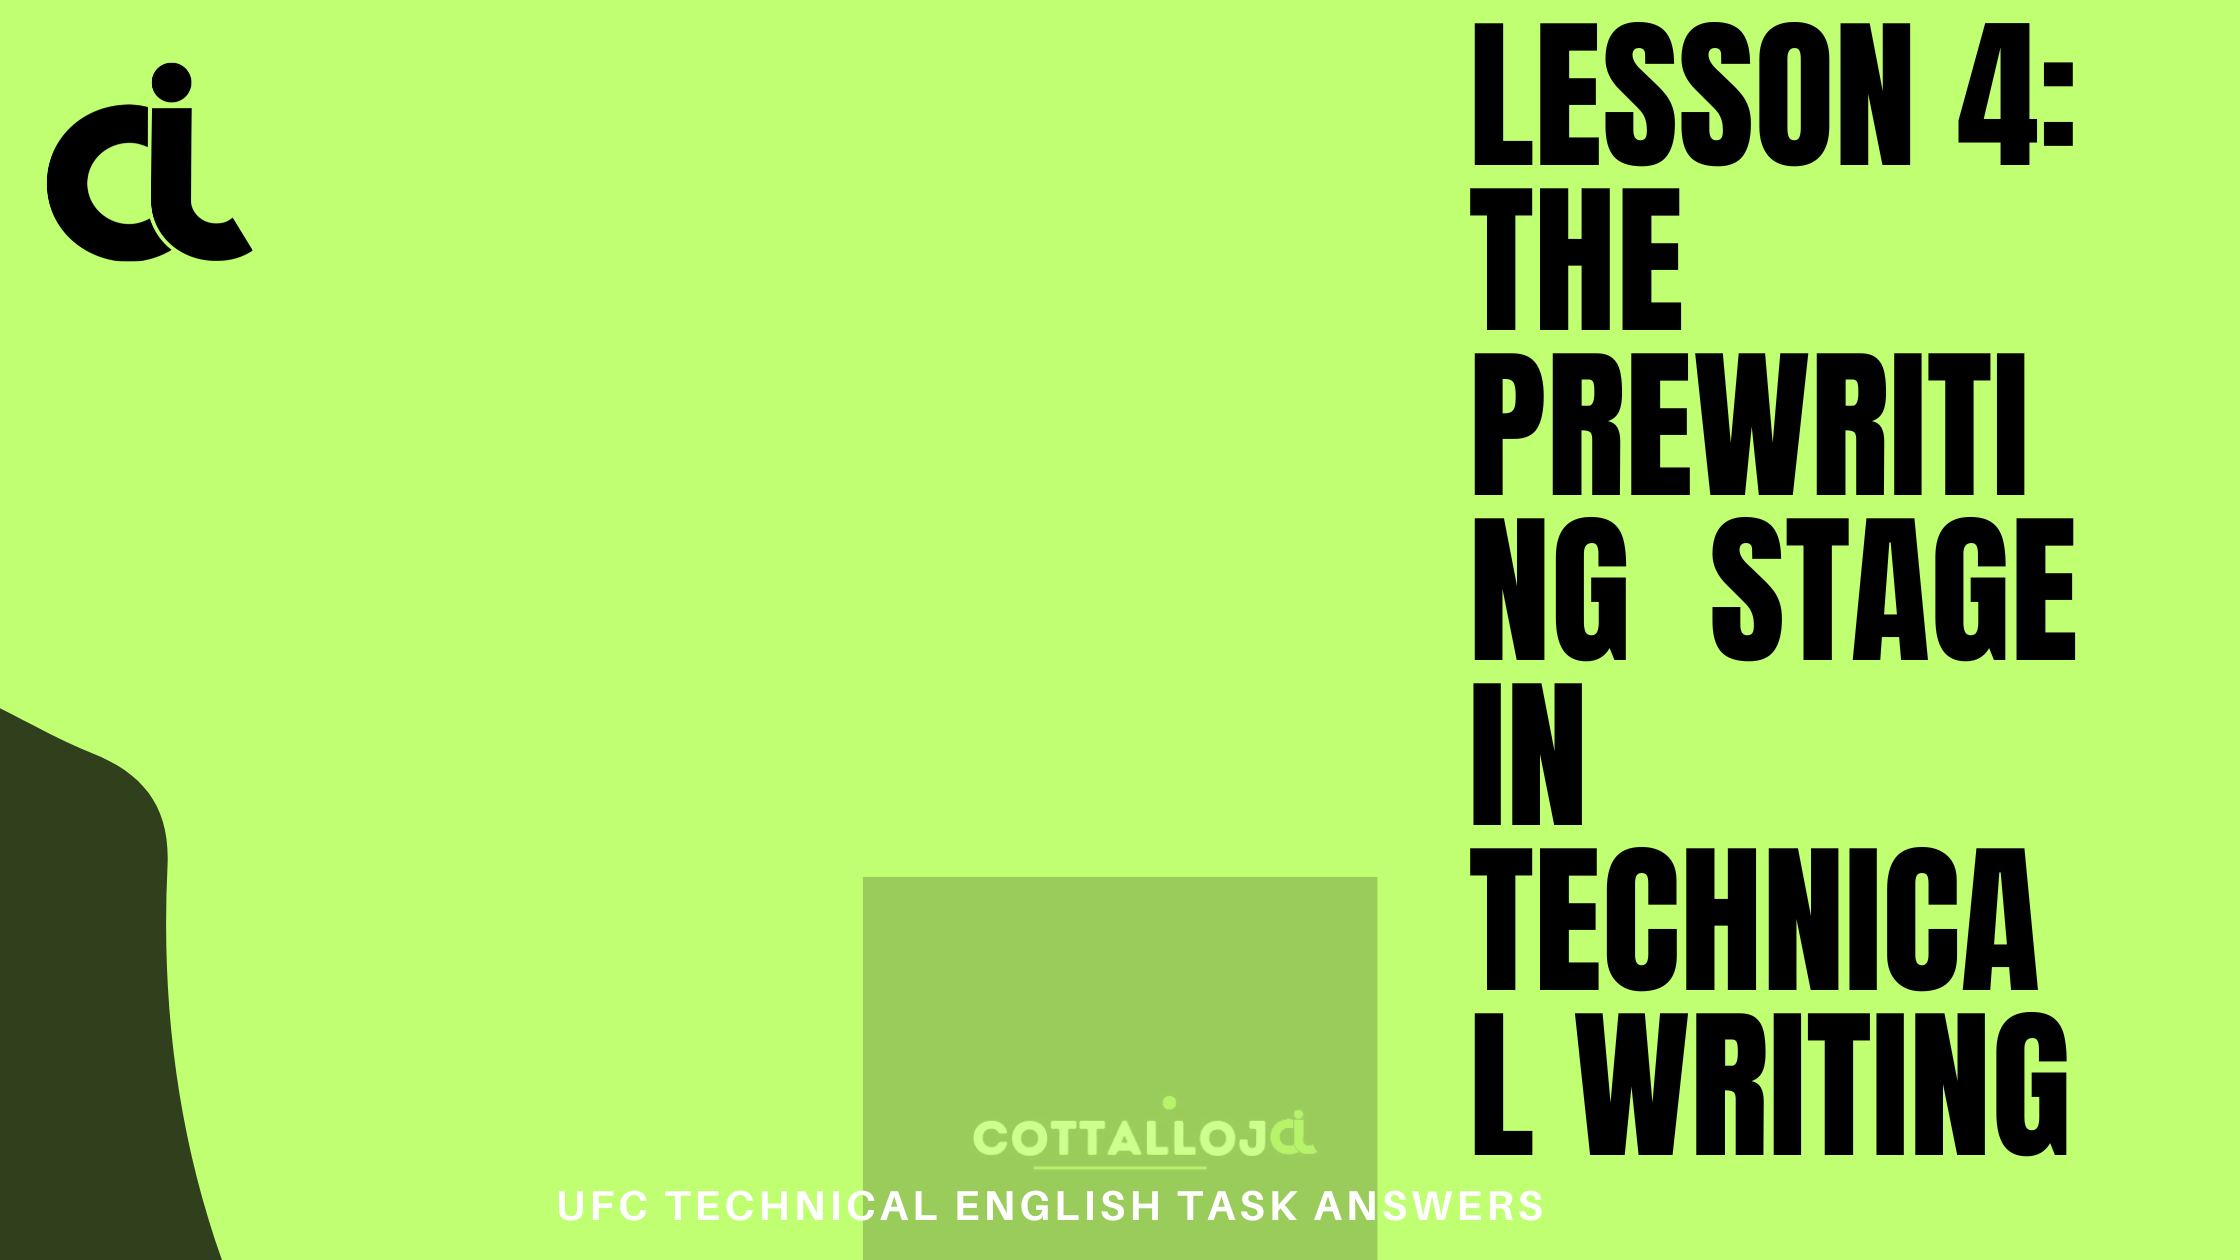 Lesson 4: The Prewriting Stage in Technical Writing